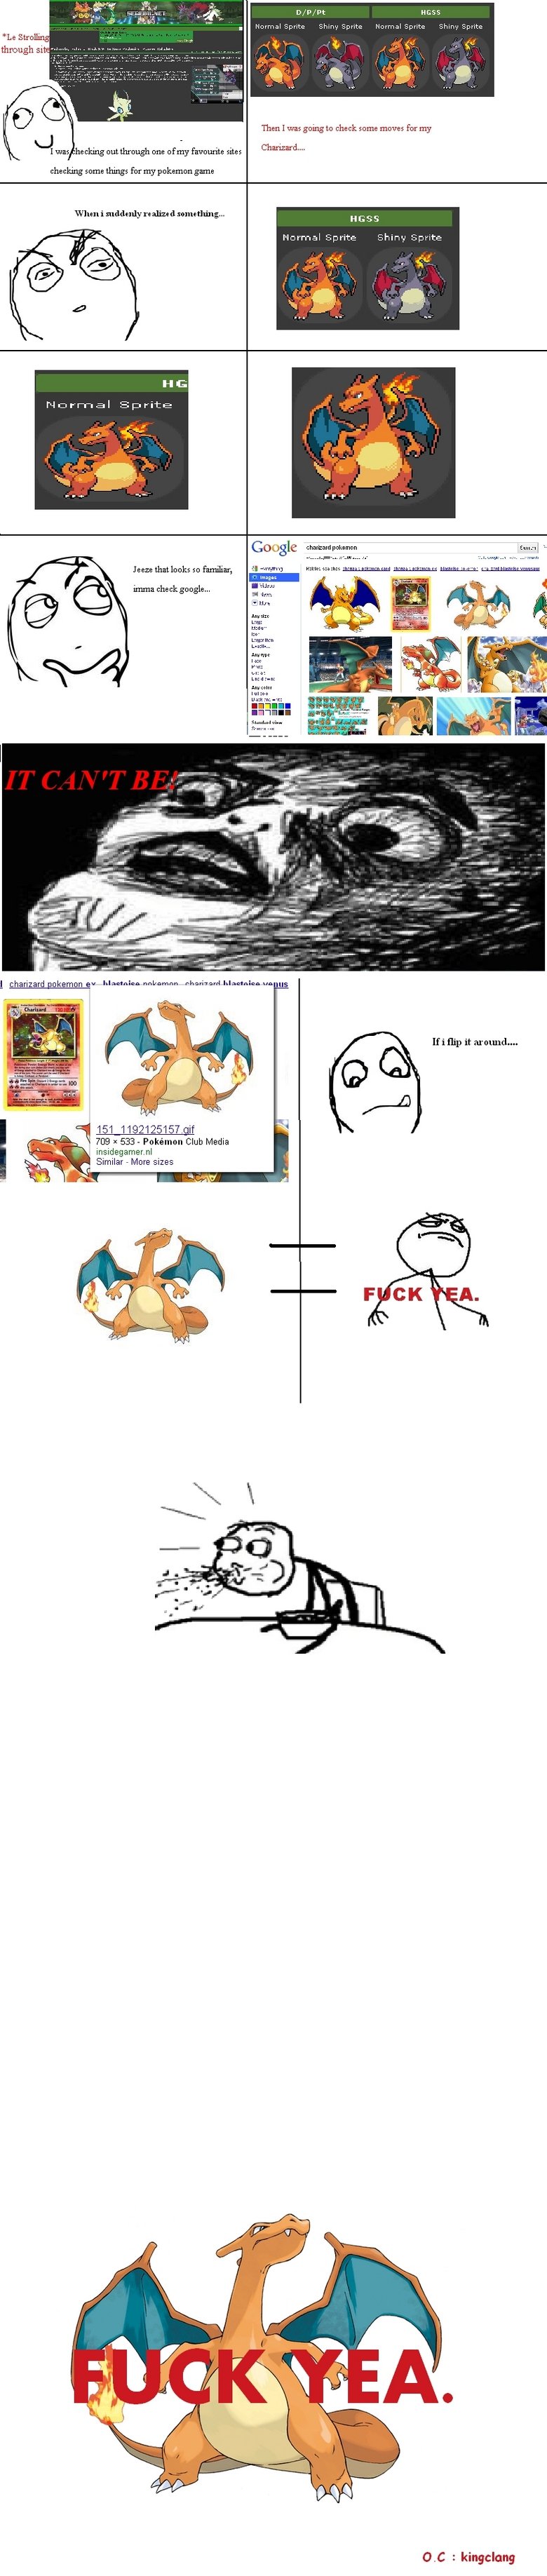 Theres a reason why Charizard is so good. I dont know if someone else has noticed it, but hopefully it aint a repost. Thu: [ checksum, mm. far my c? was "kbs an